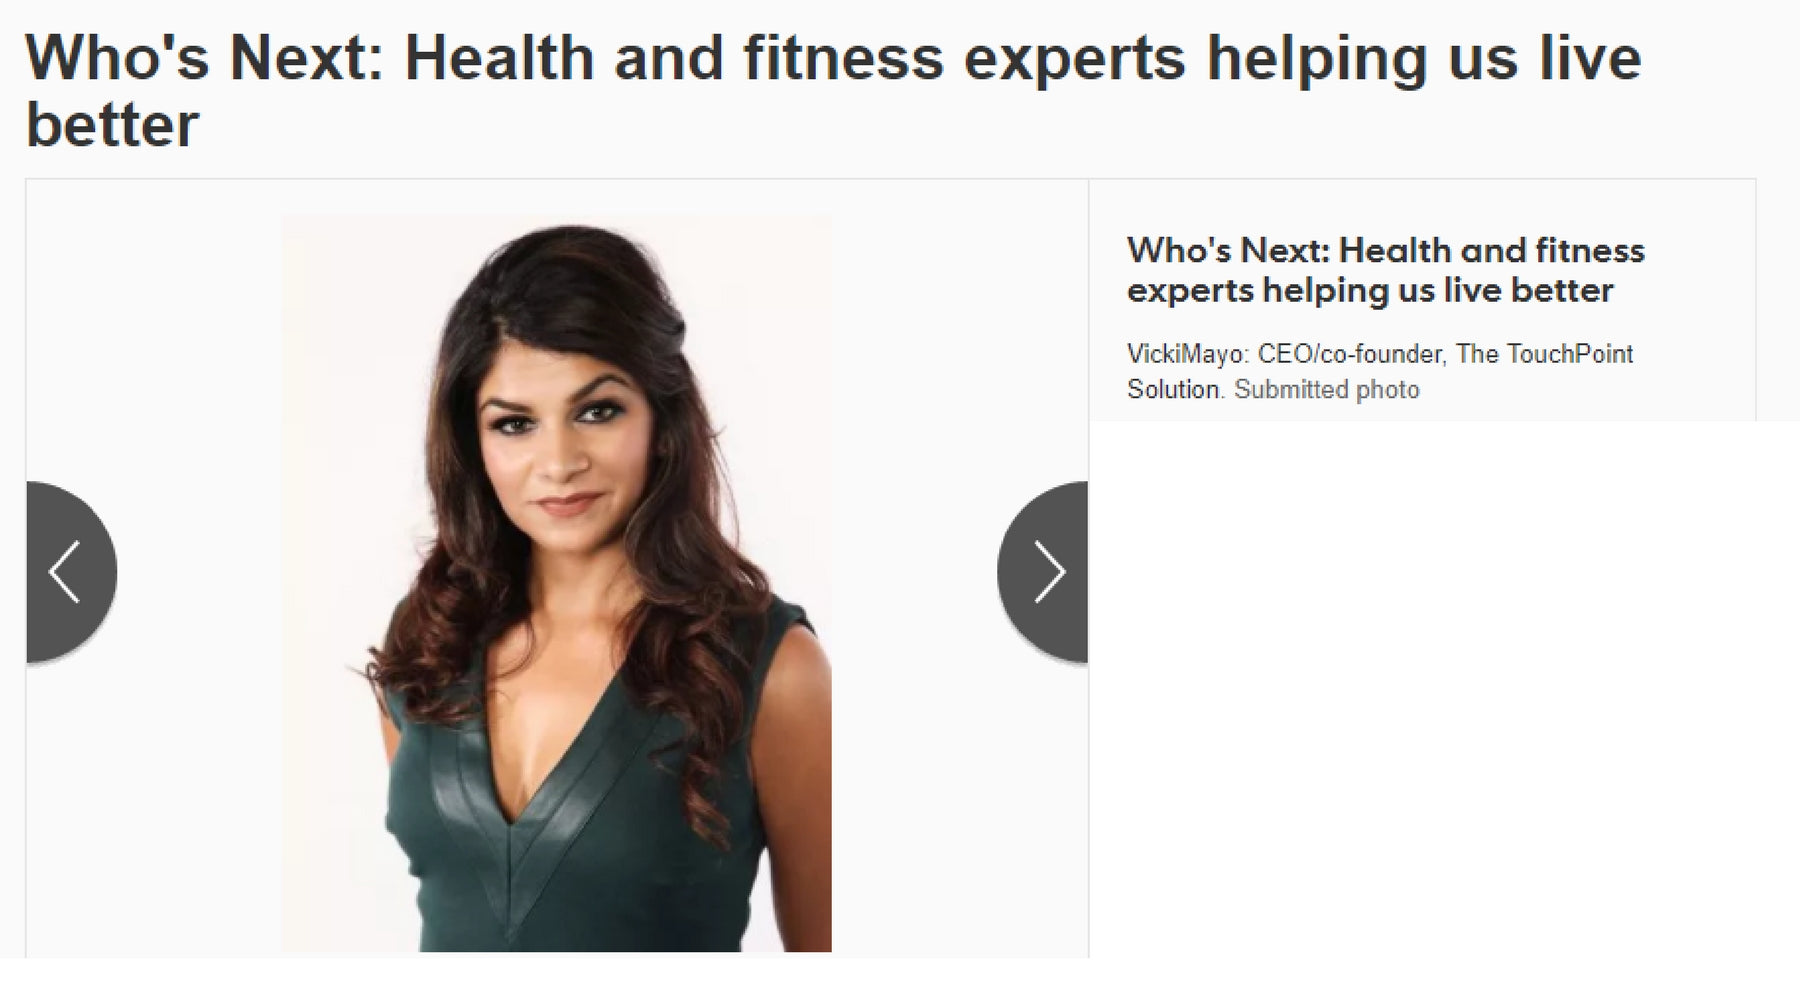 AZCentral - Health and fitness experts helping us live better